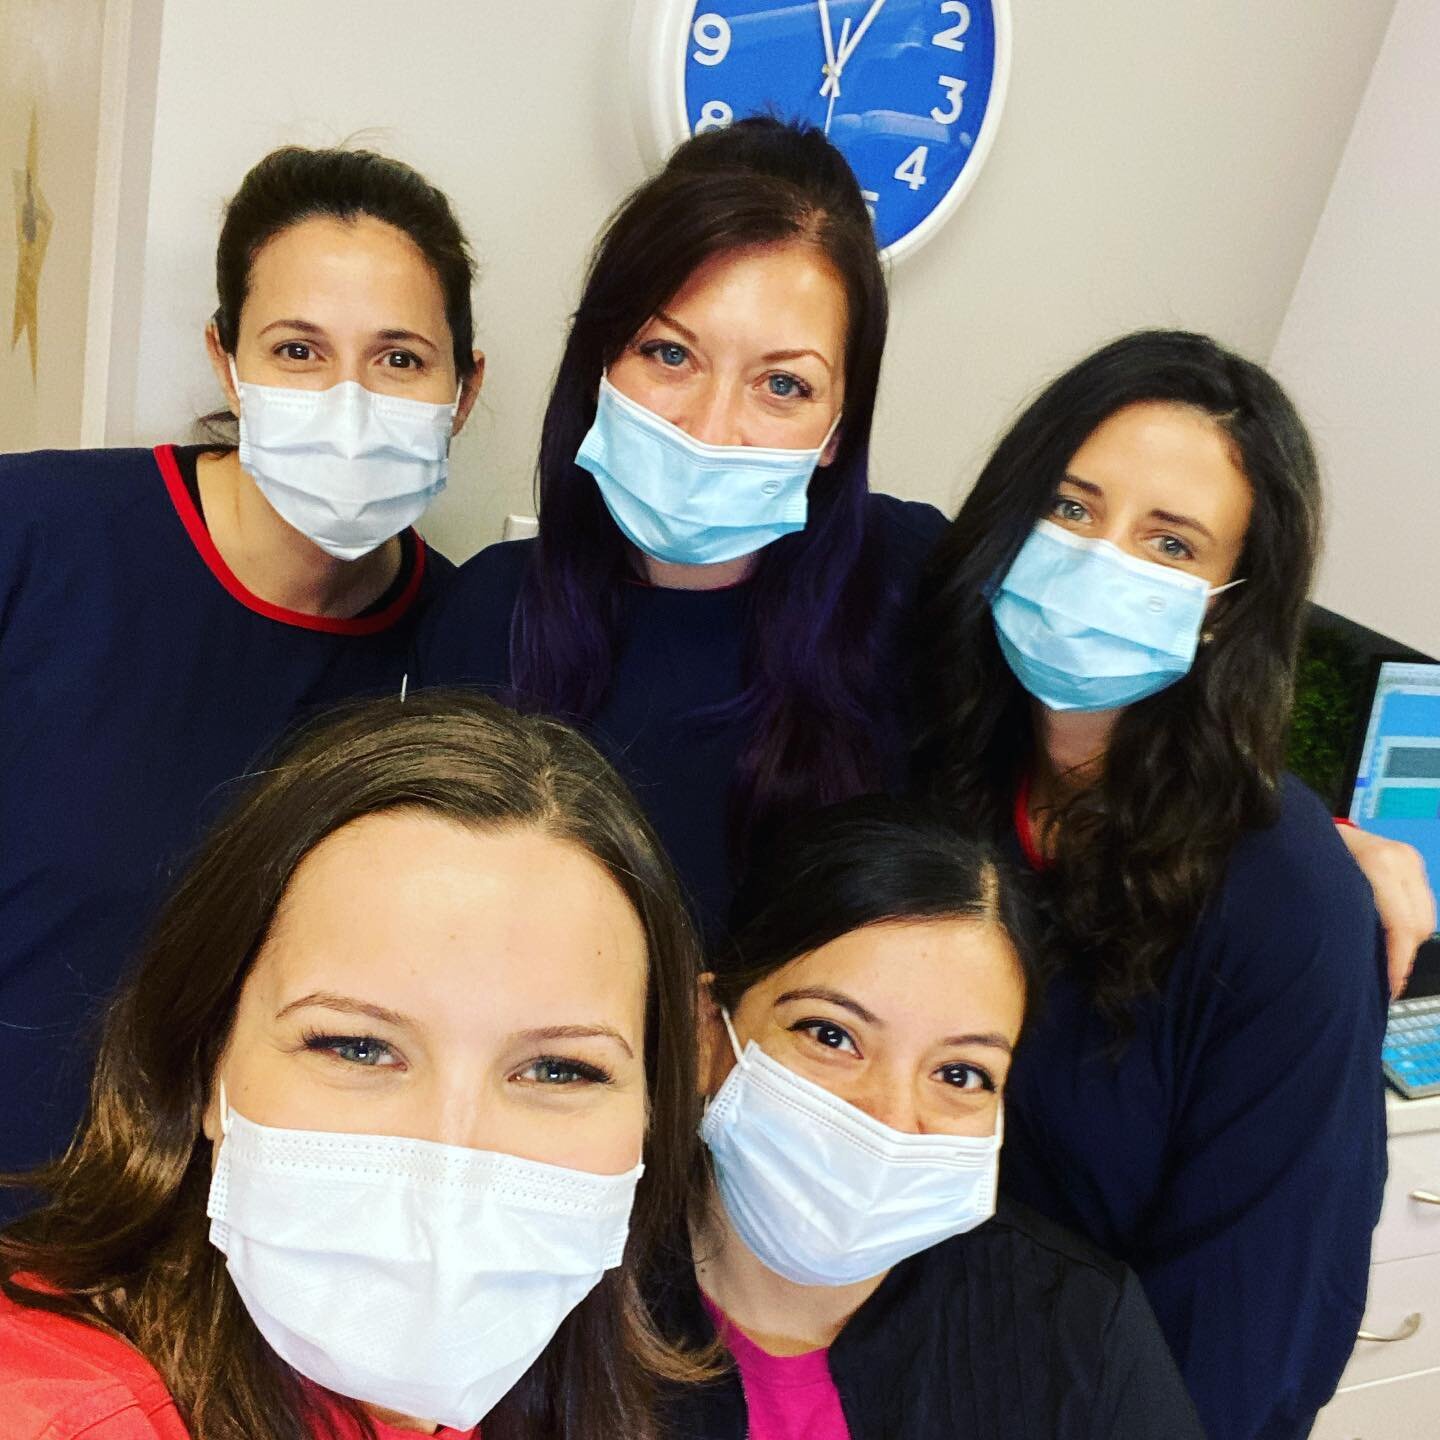 Selfie Saturday with the girls. #dochollywood #hollywoodsmiles #hollywoodstars #nutleypediatricdentistry #npd @rachelb_810 @rebecca_michelle @jenny.h001